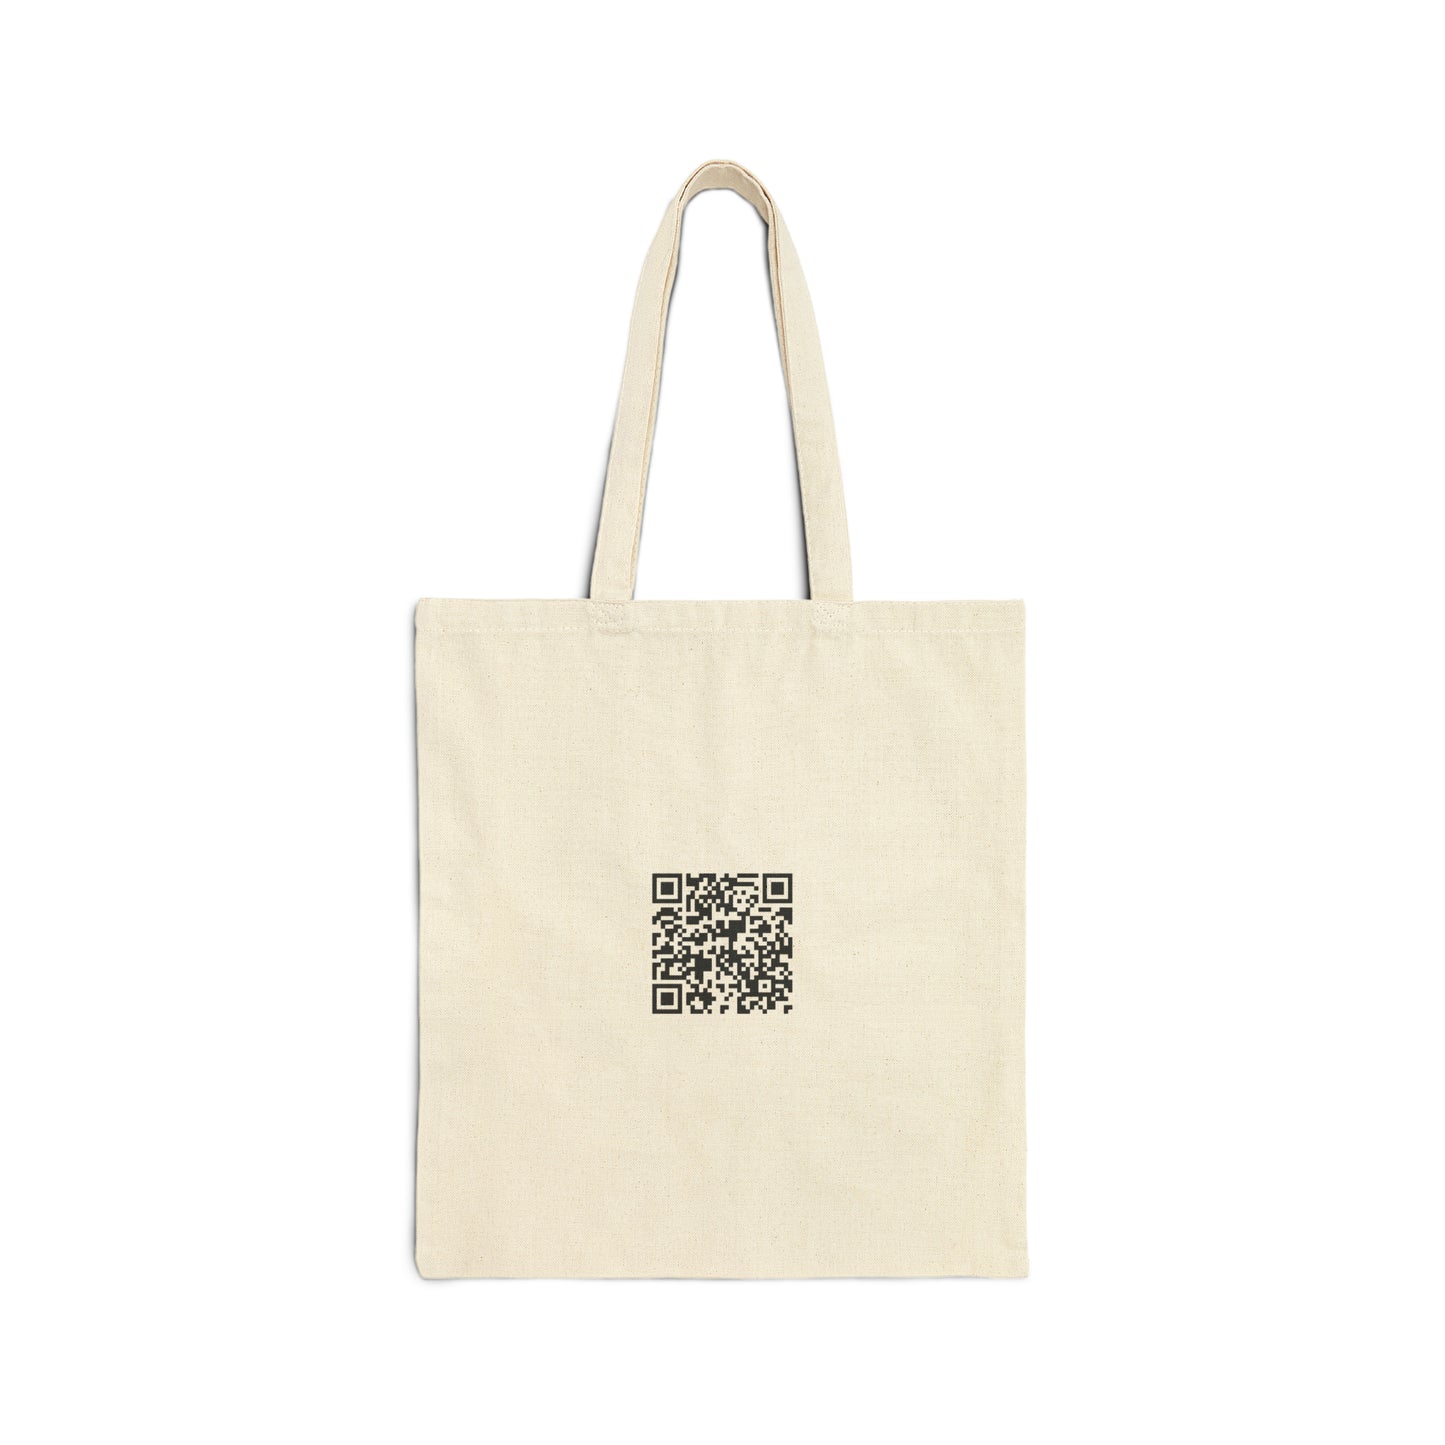 The Branded Ones - Cotton Canvas Tote Bag